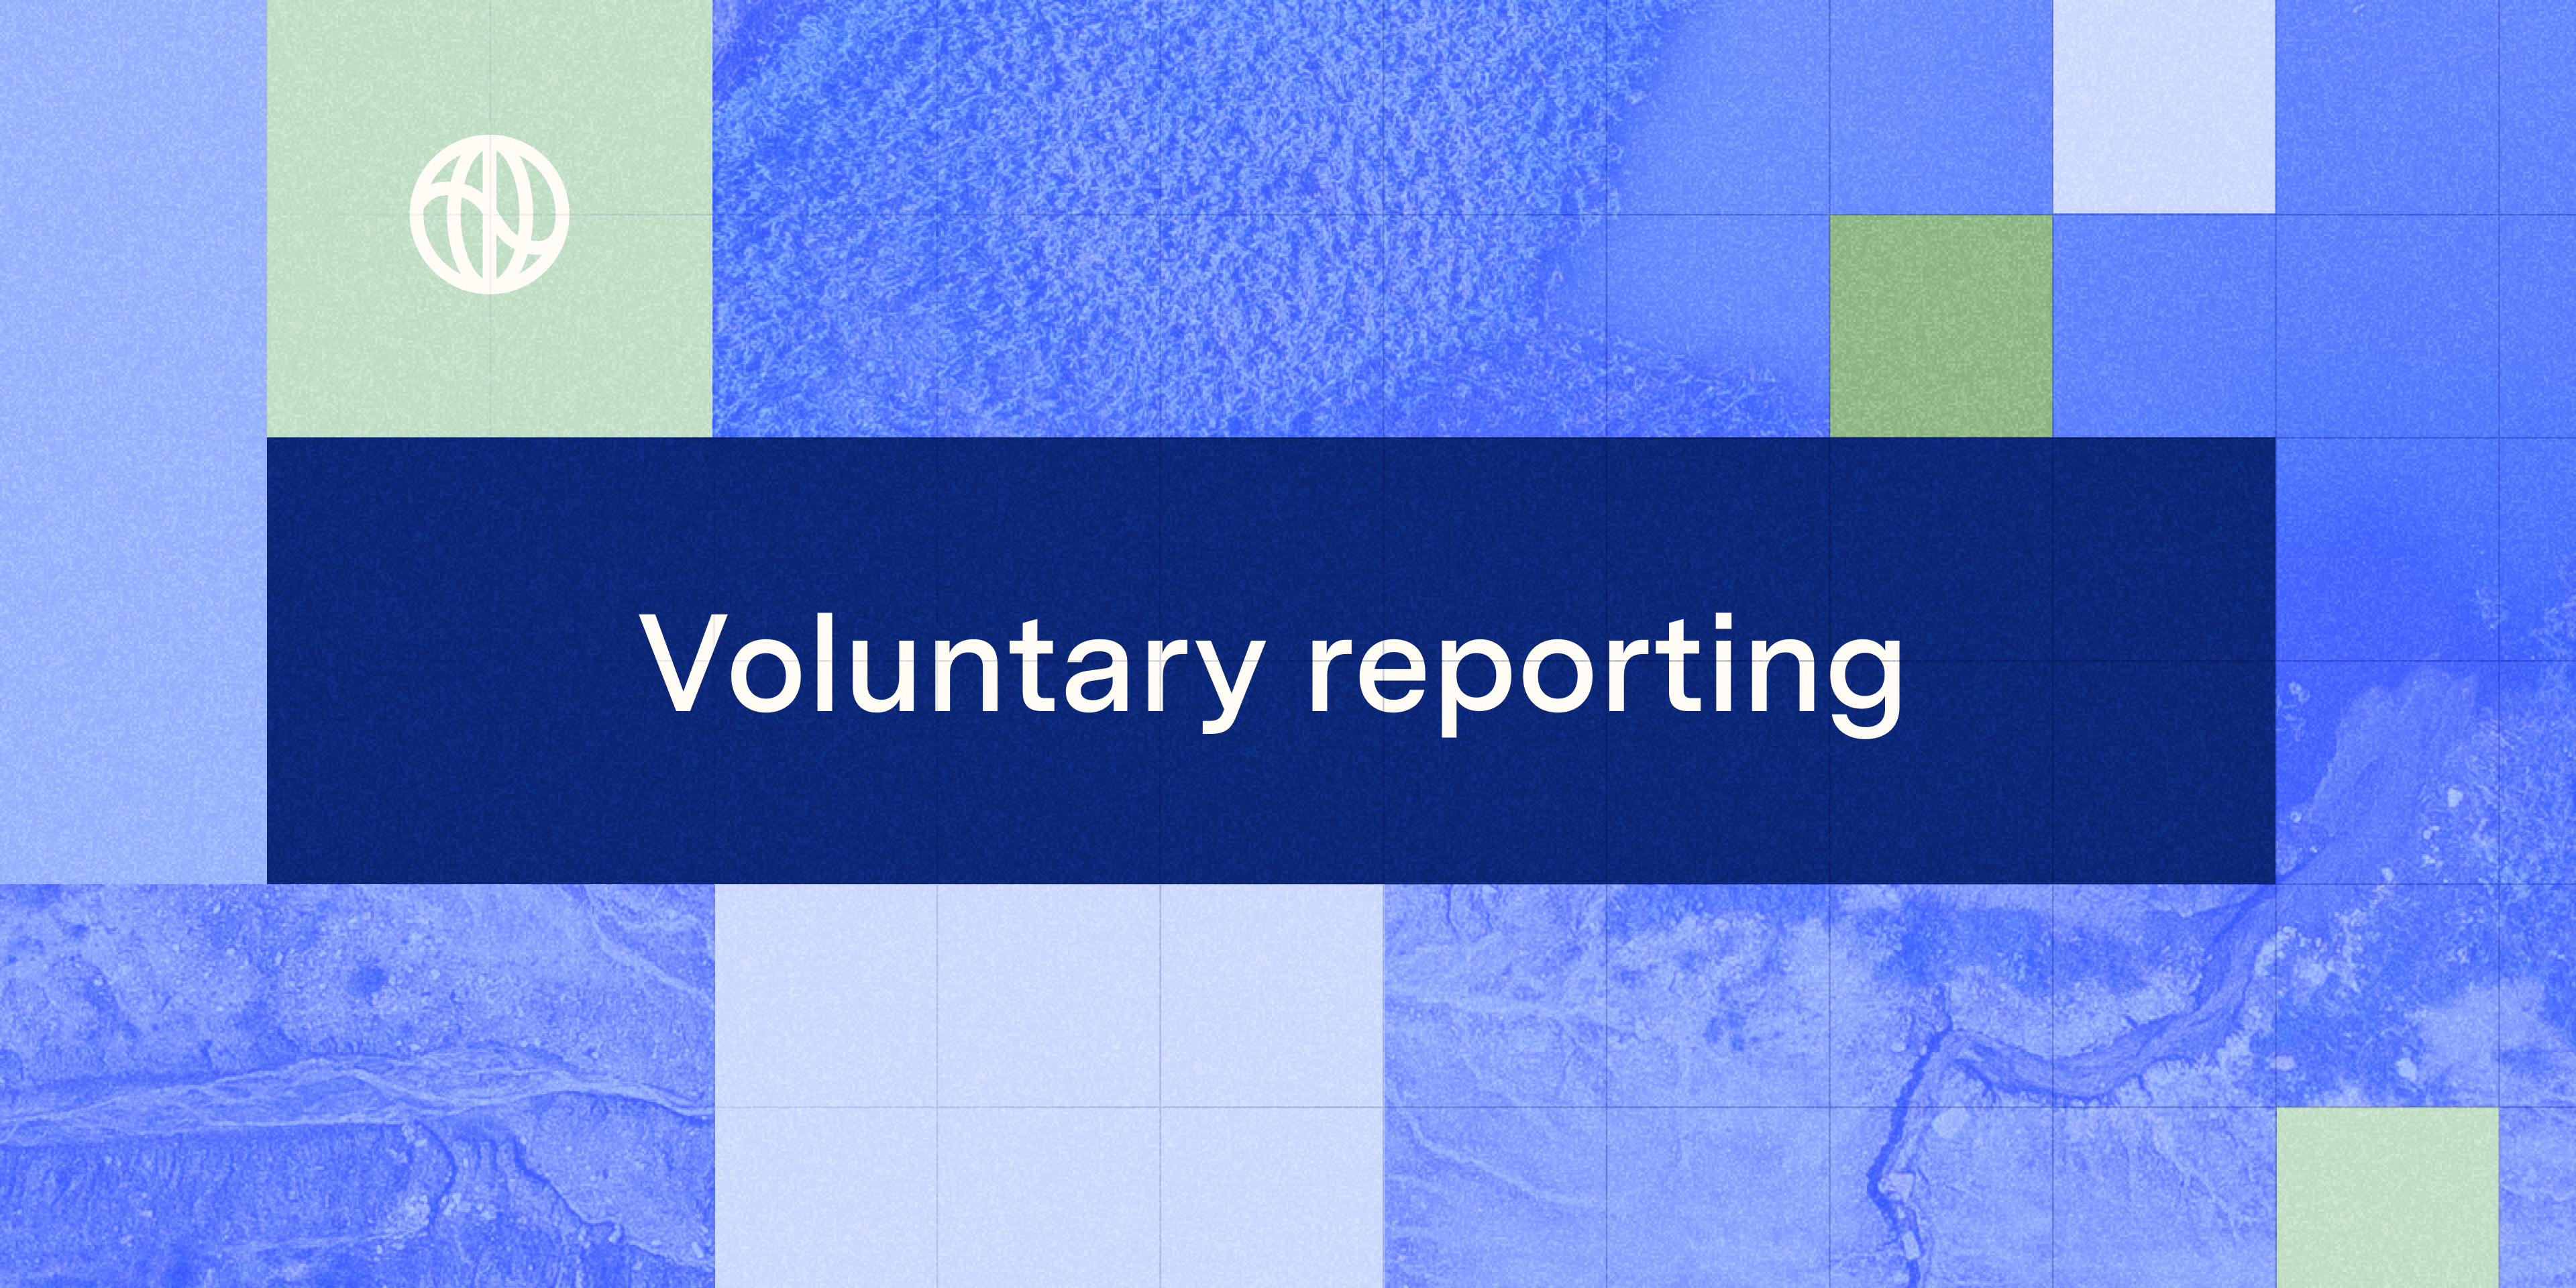 Image with text "Voluntary reporting"